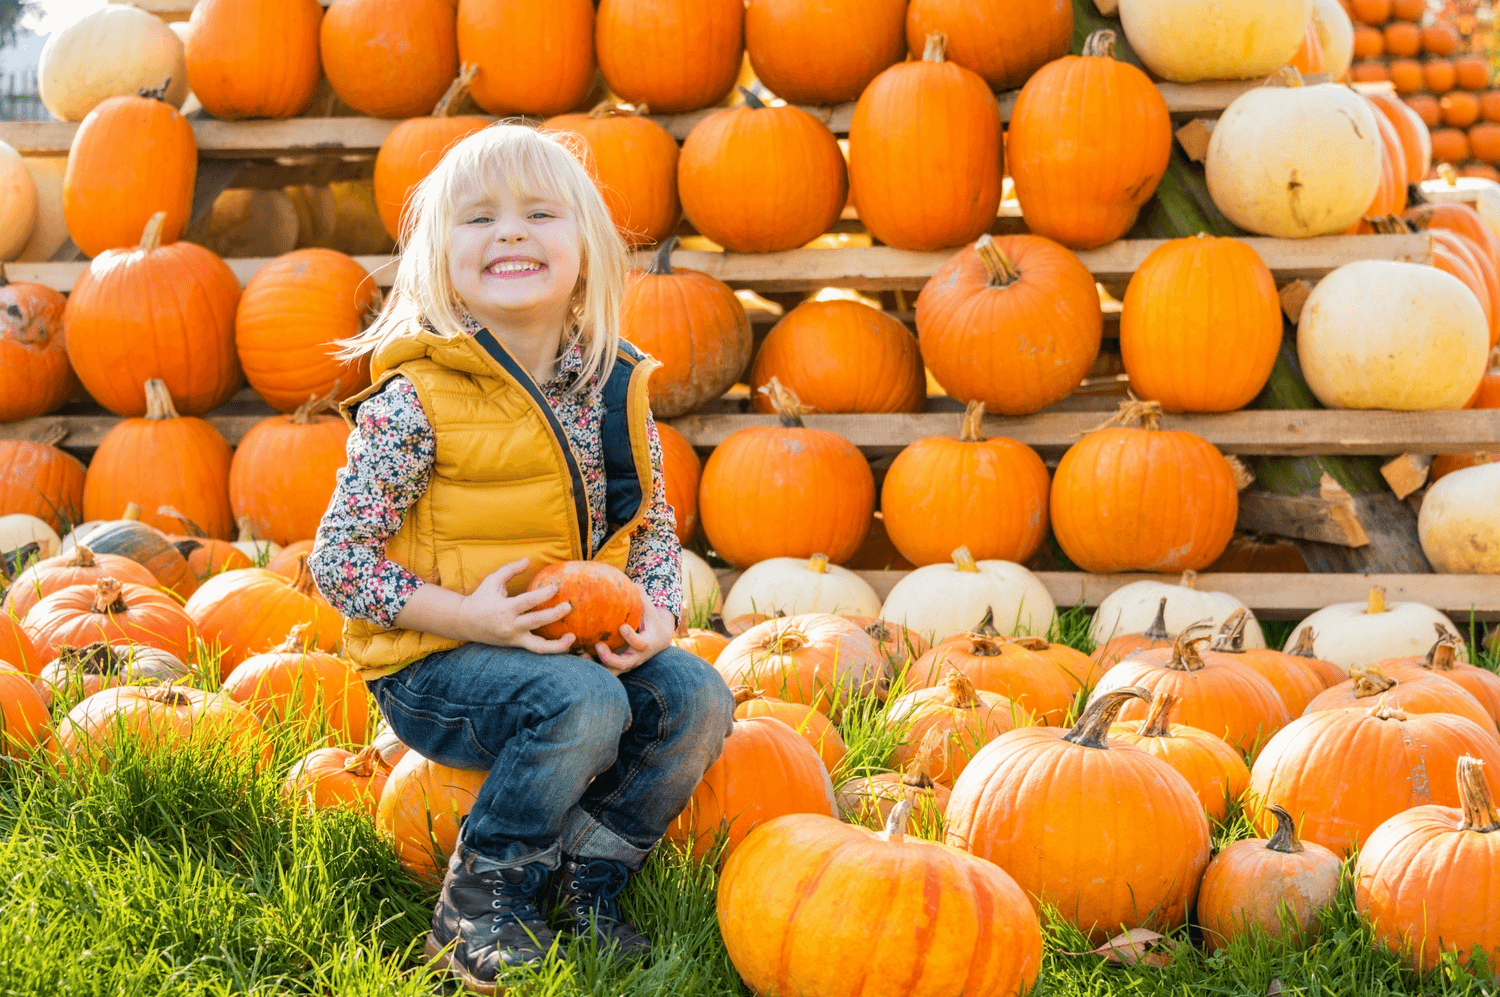 Indiana’s Pumpkin Patches The Best Places to Go in 2020